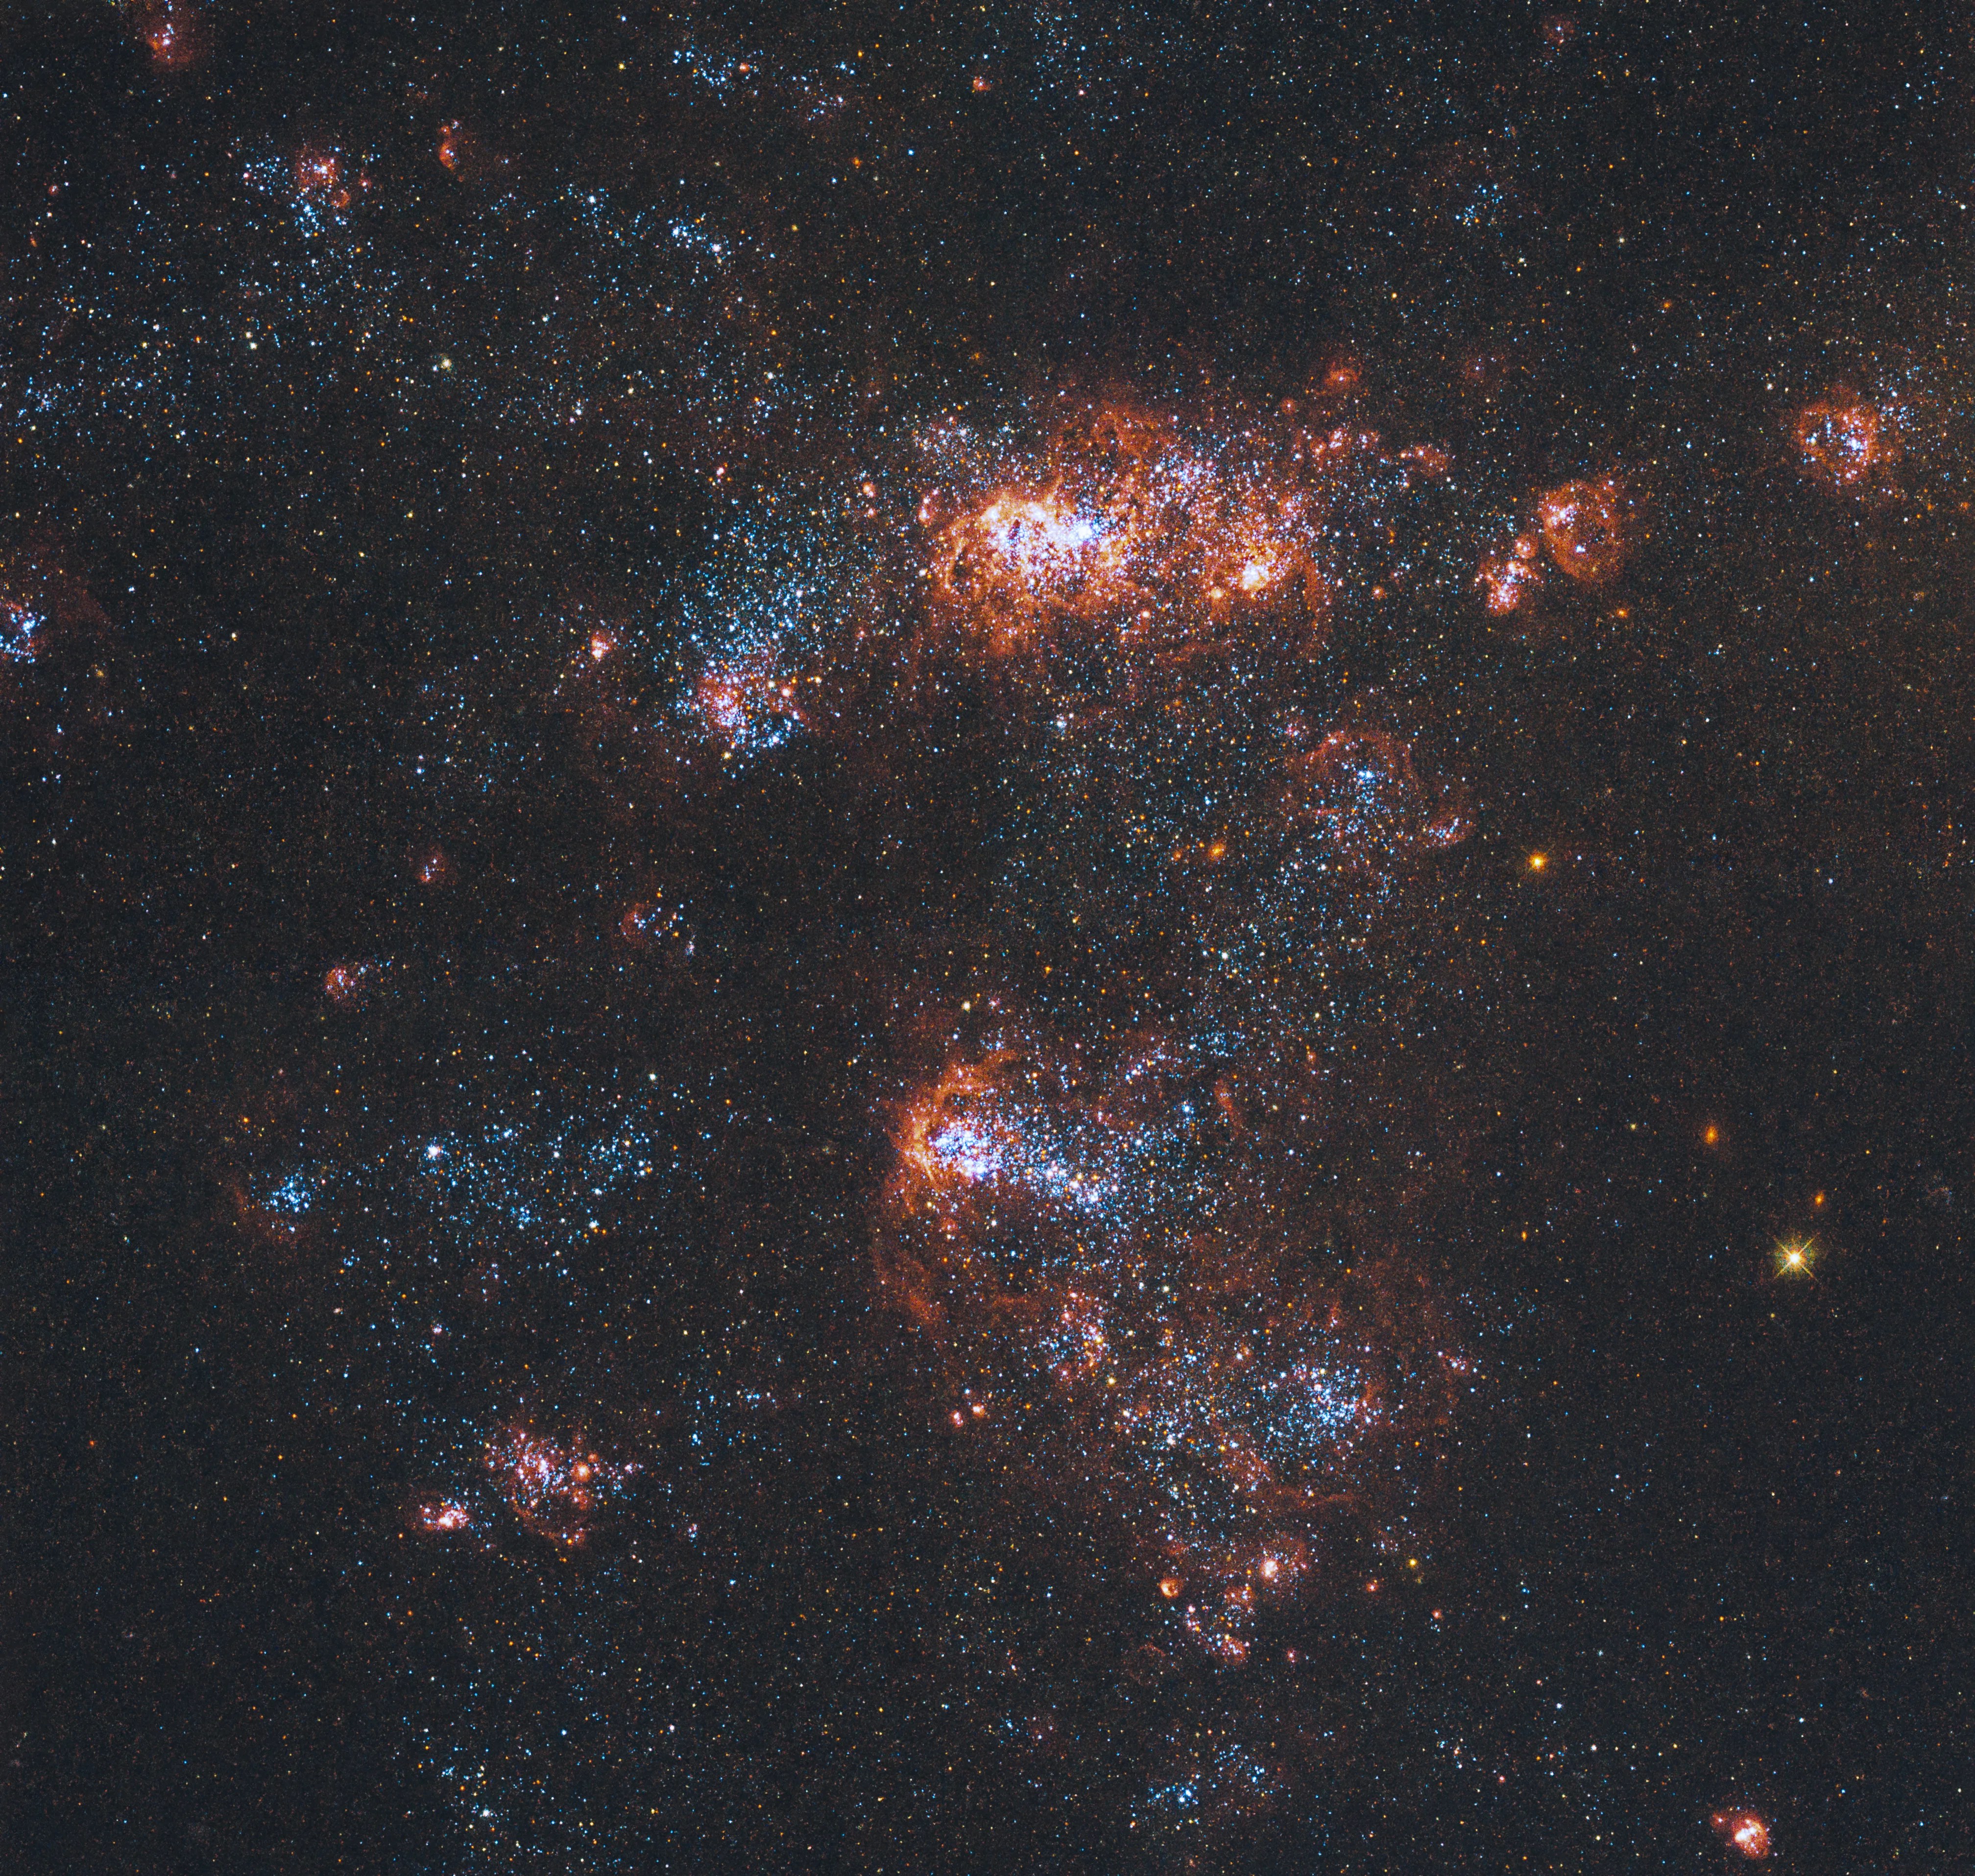 A patriotic groups of red, white, and blue stars, gas, and dust fills the scene on a black background. Groups of stars and gas are denser at image center. One lone yellow star shines toward the lower right.